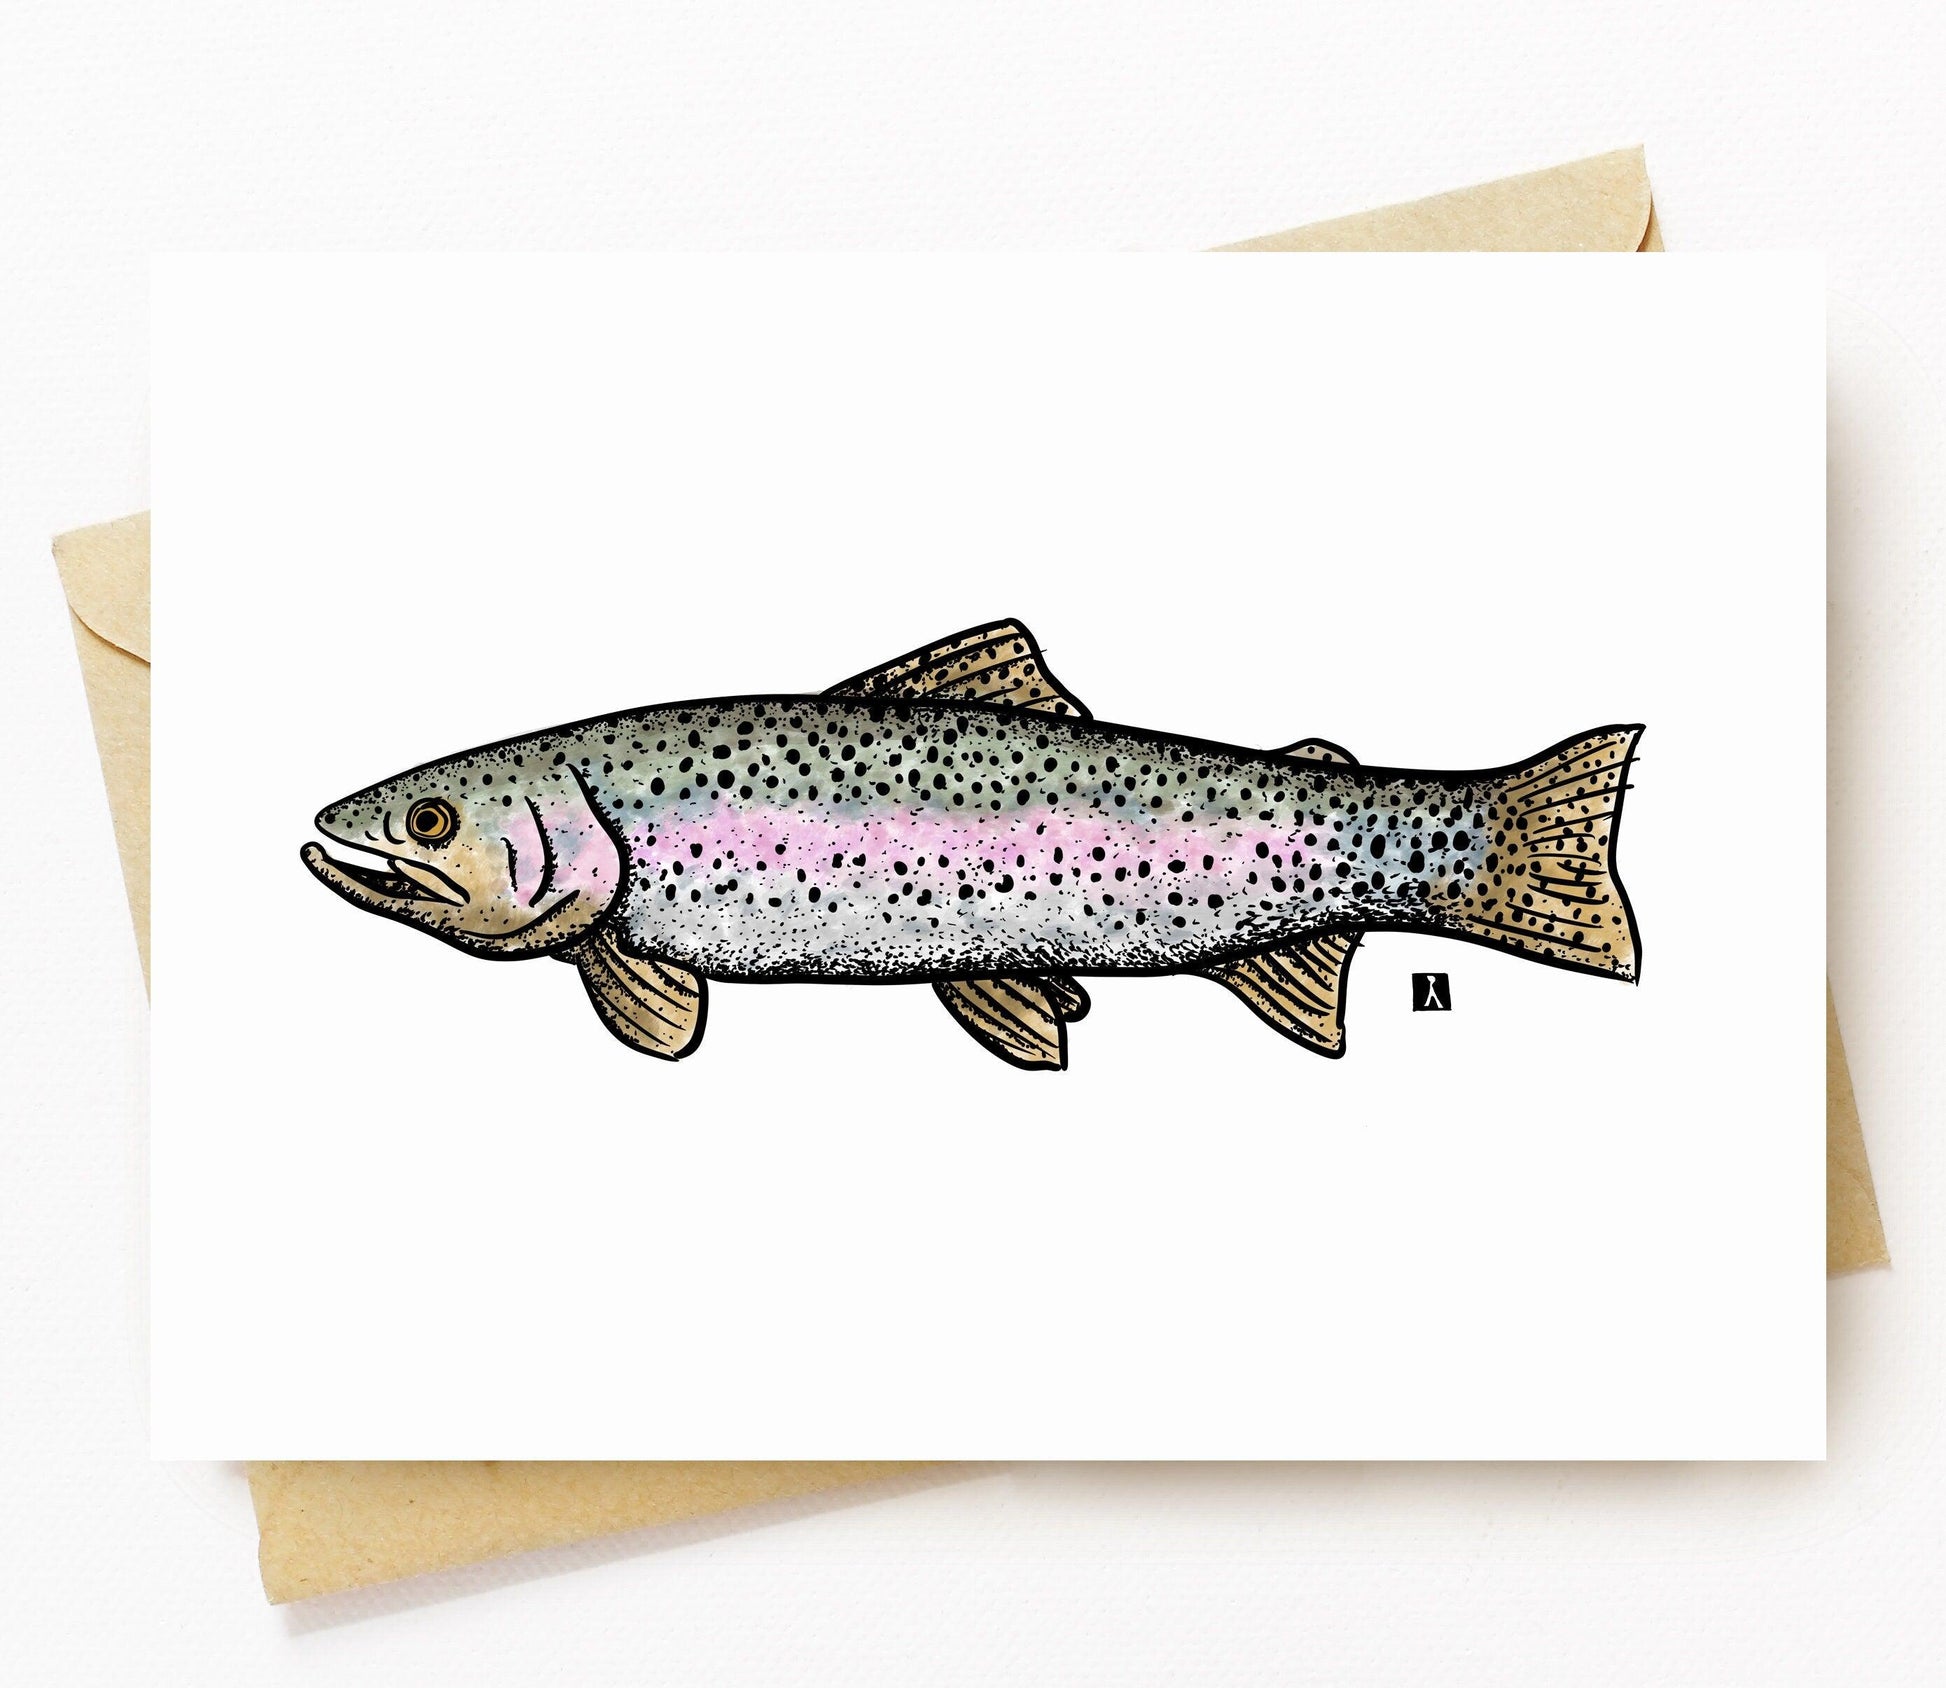 BellavanceInk: Greeting Card With Pen & Ink/Watercolor Of Rainbow Trout Fish 5 x 7 Inches - BellavanceInk